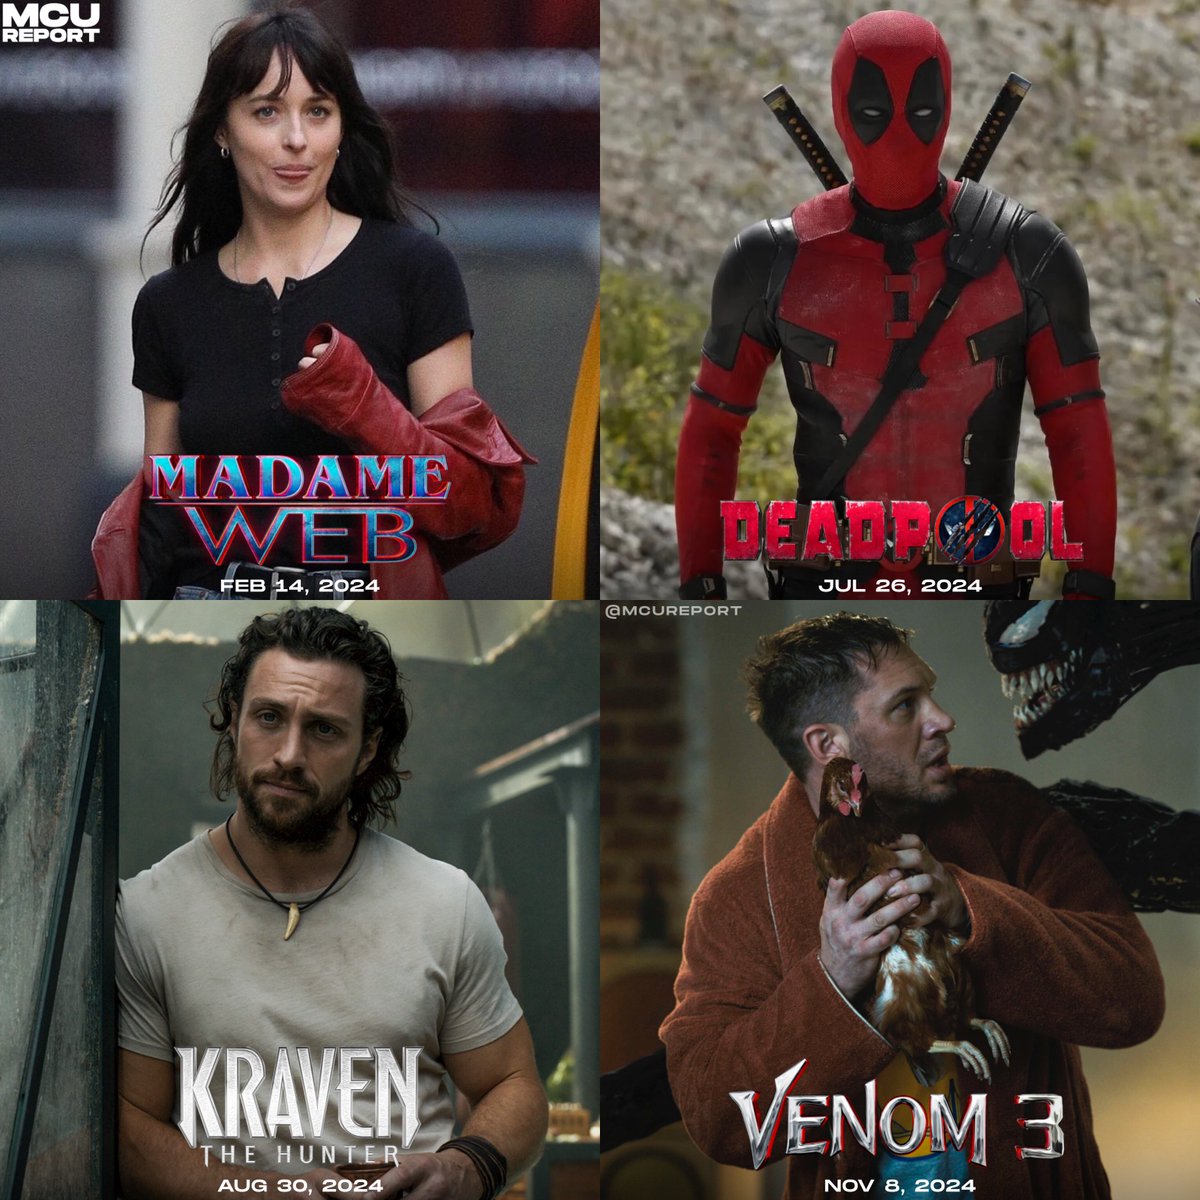 4 Marvel movies are currently set to release in 2024 🍿

• #MadameWeb — Feb 14, 2024
• #Deadpool3 — July 26, 2024
• #KravenTheHunter — Aug 30, 2024
• #Venom3 — Nov 8, 2024